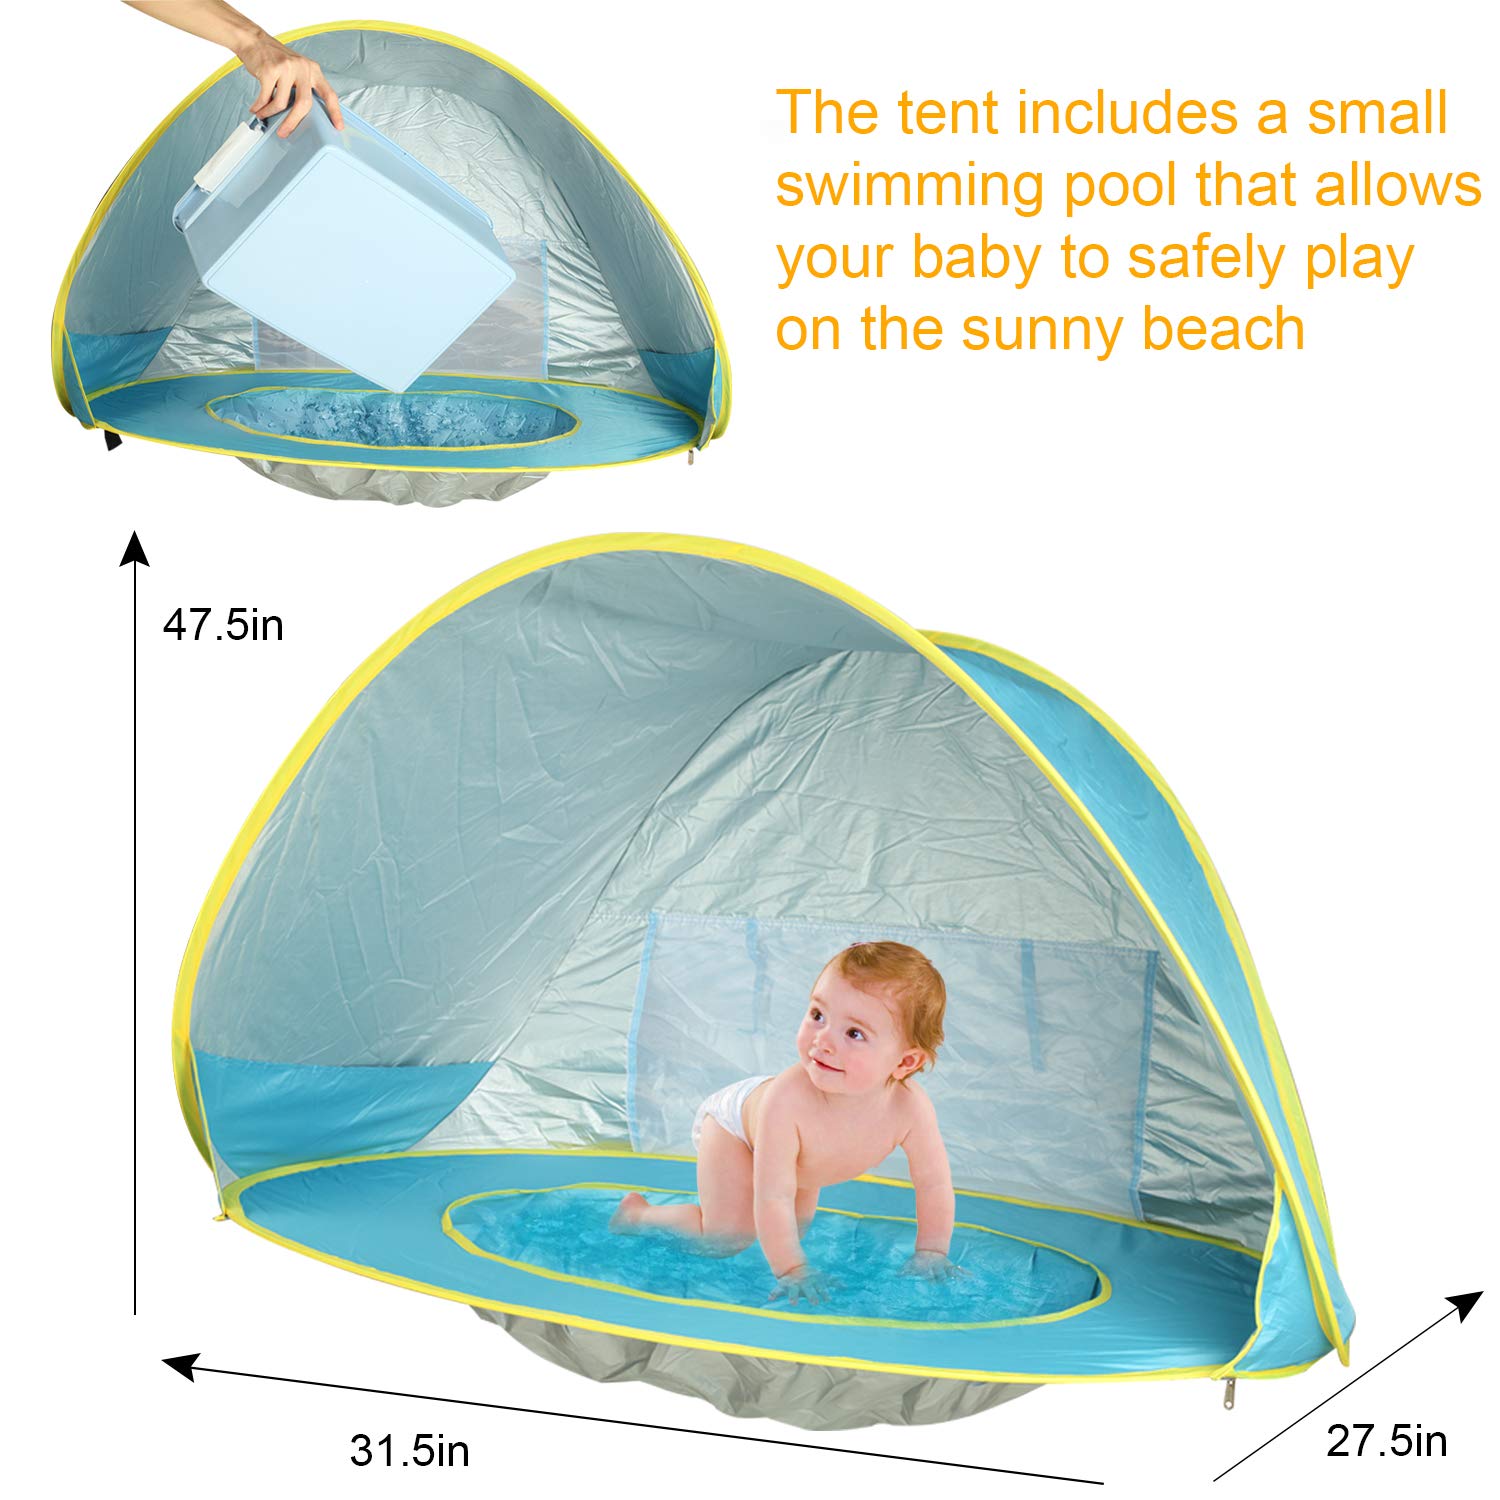 DOTSOG Baby Beach Tent Pop Up Portable Shade Pool UPF 50+ Protection Sun Shelter Beach Umbrella for Infant Beach Camping Fishing Hiking Blue